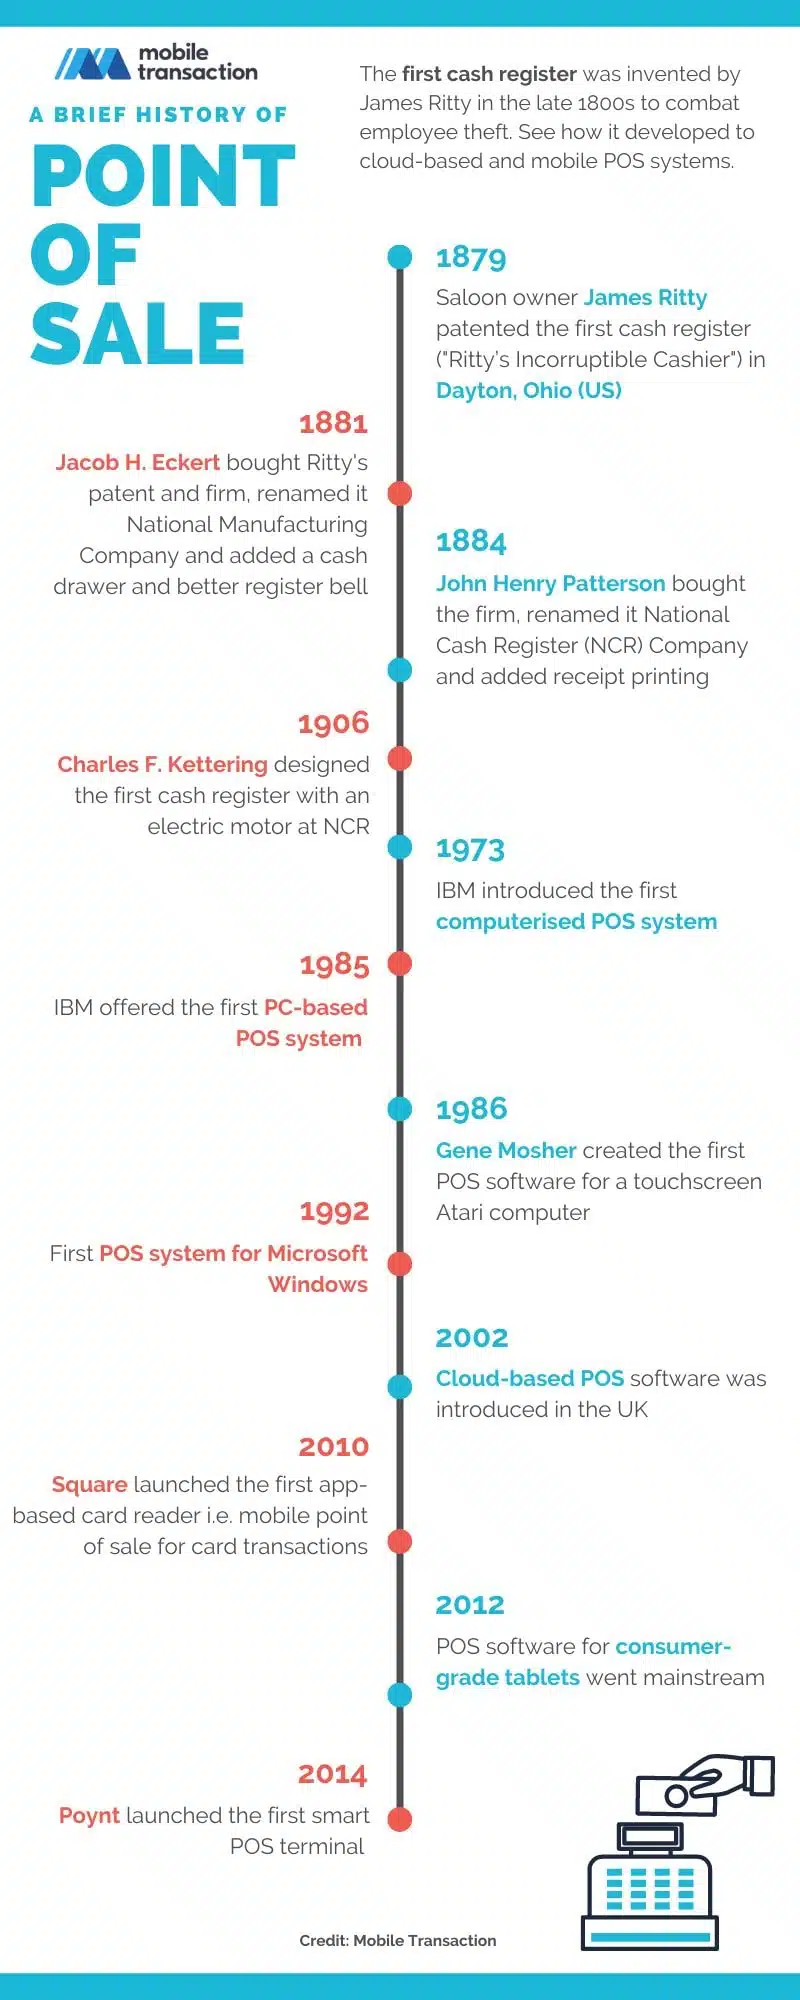 Point of Sale history infographic